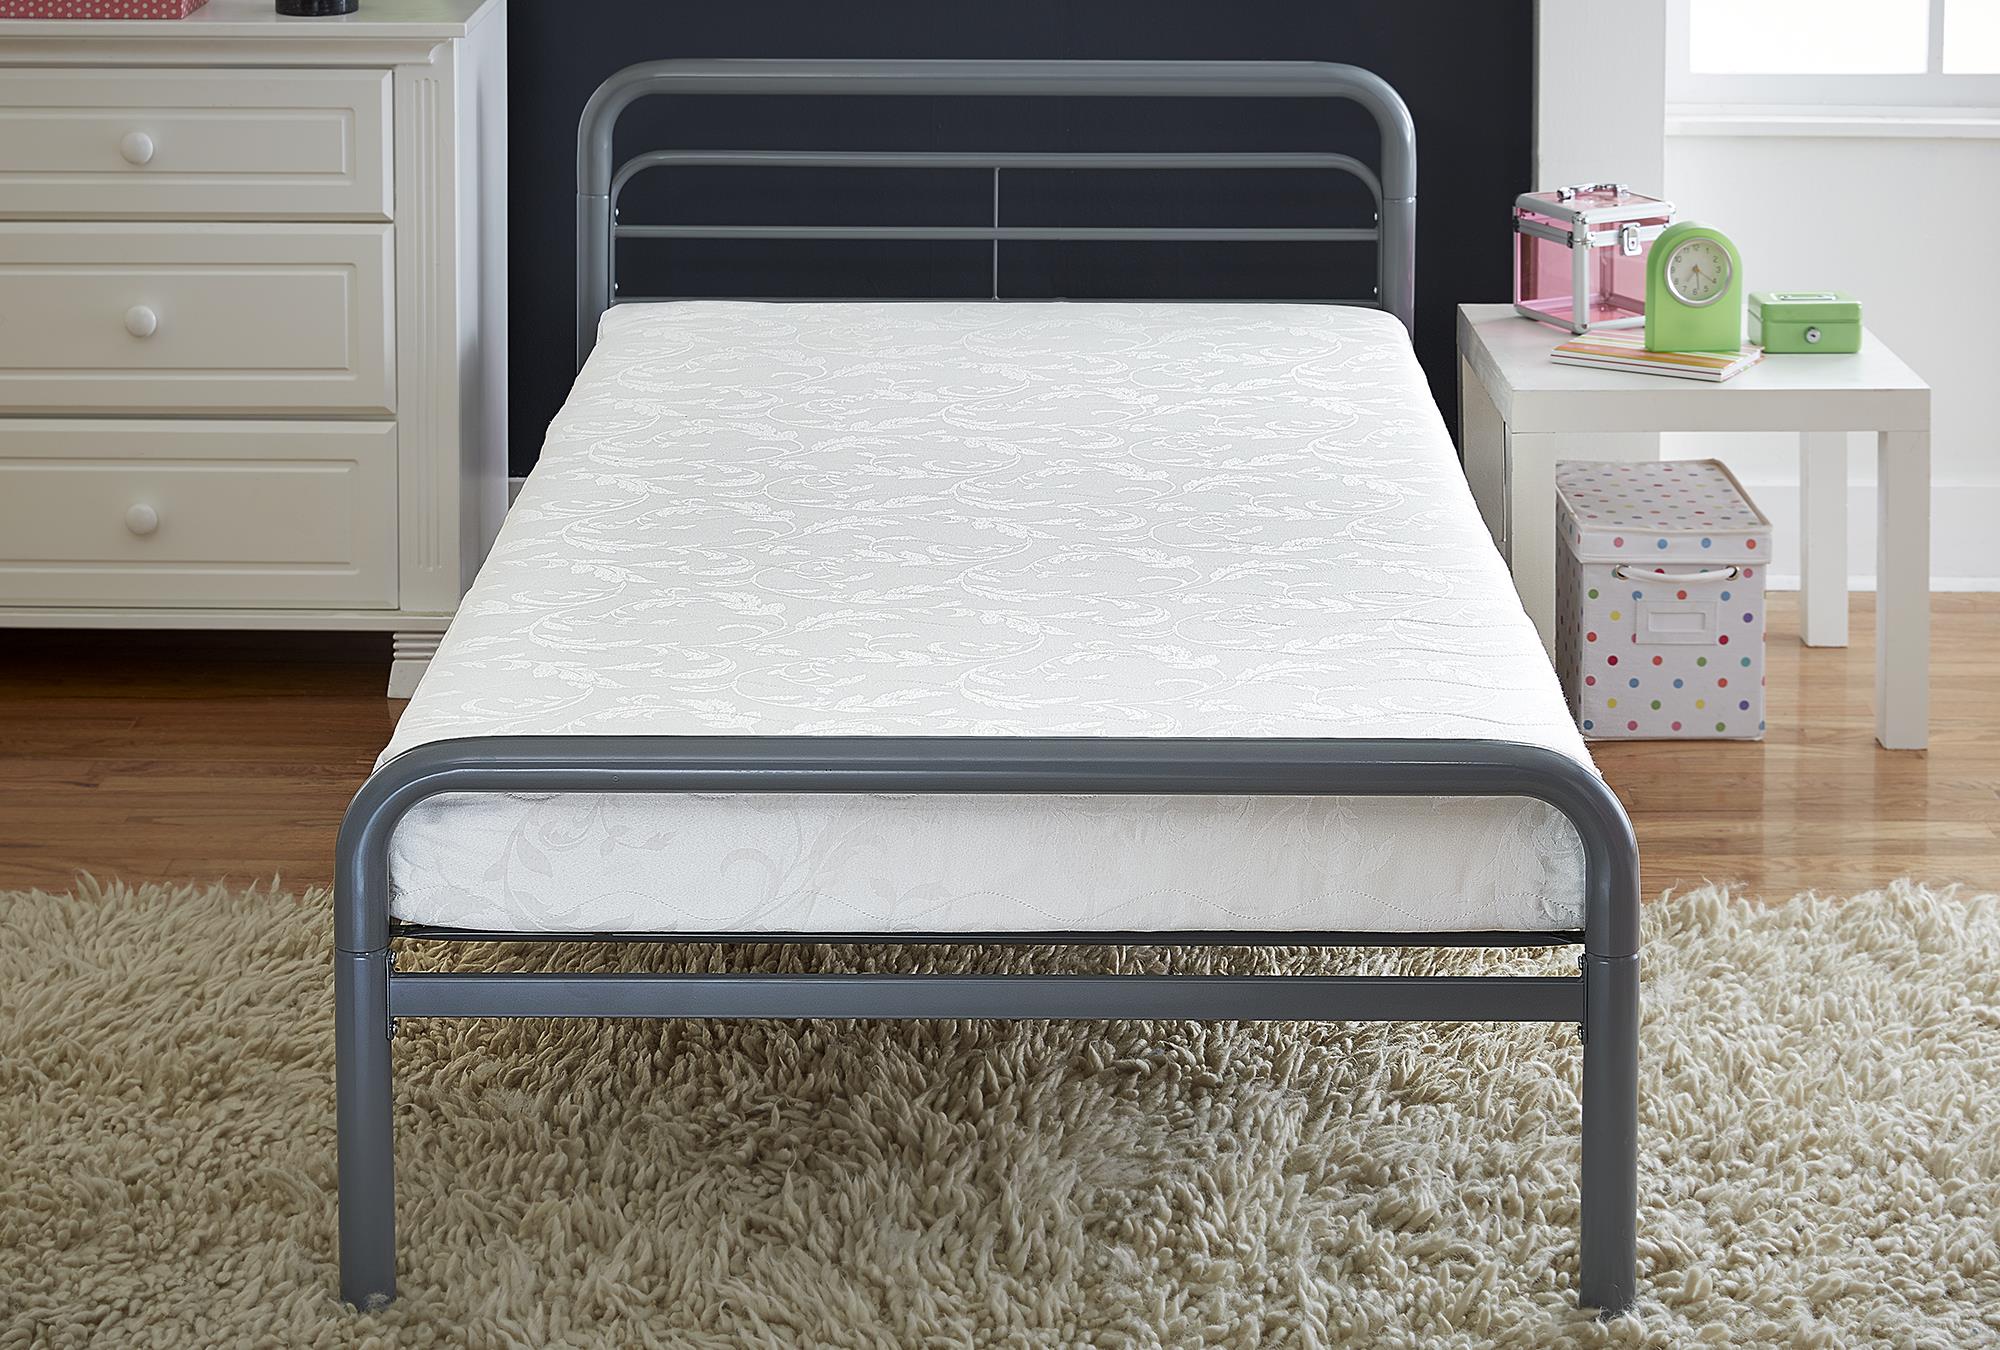 DHP Value 6 Inch Polyester Filled Bunk Bed Mattress with Jacquard Cover, Twin, White - image 2 of 9